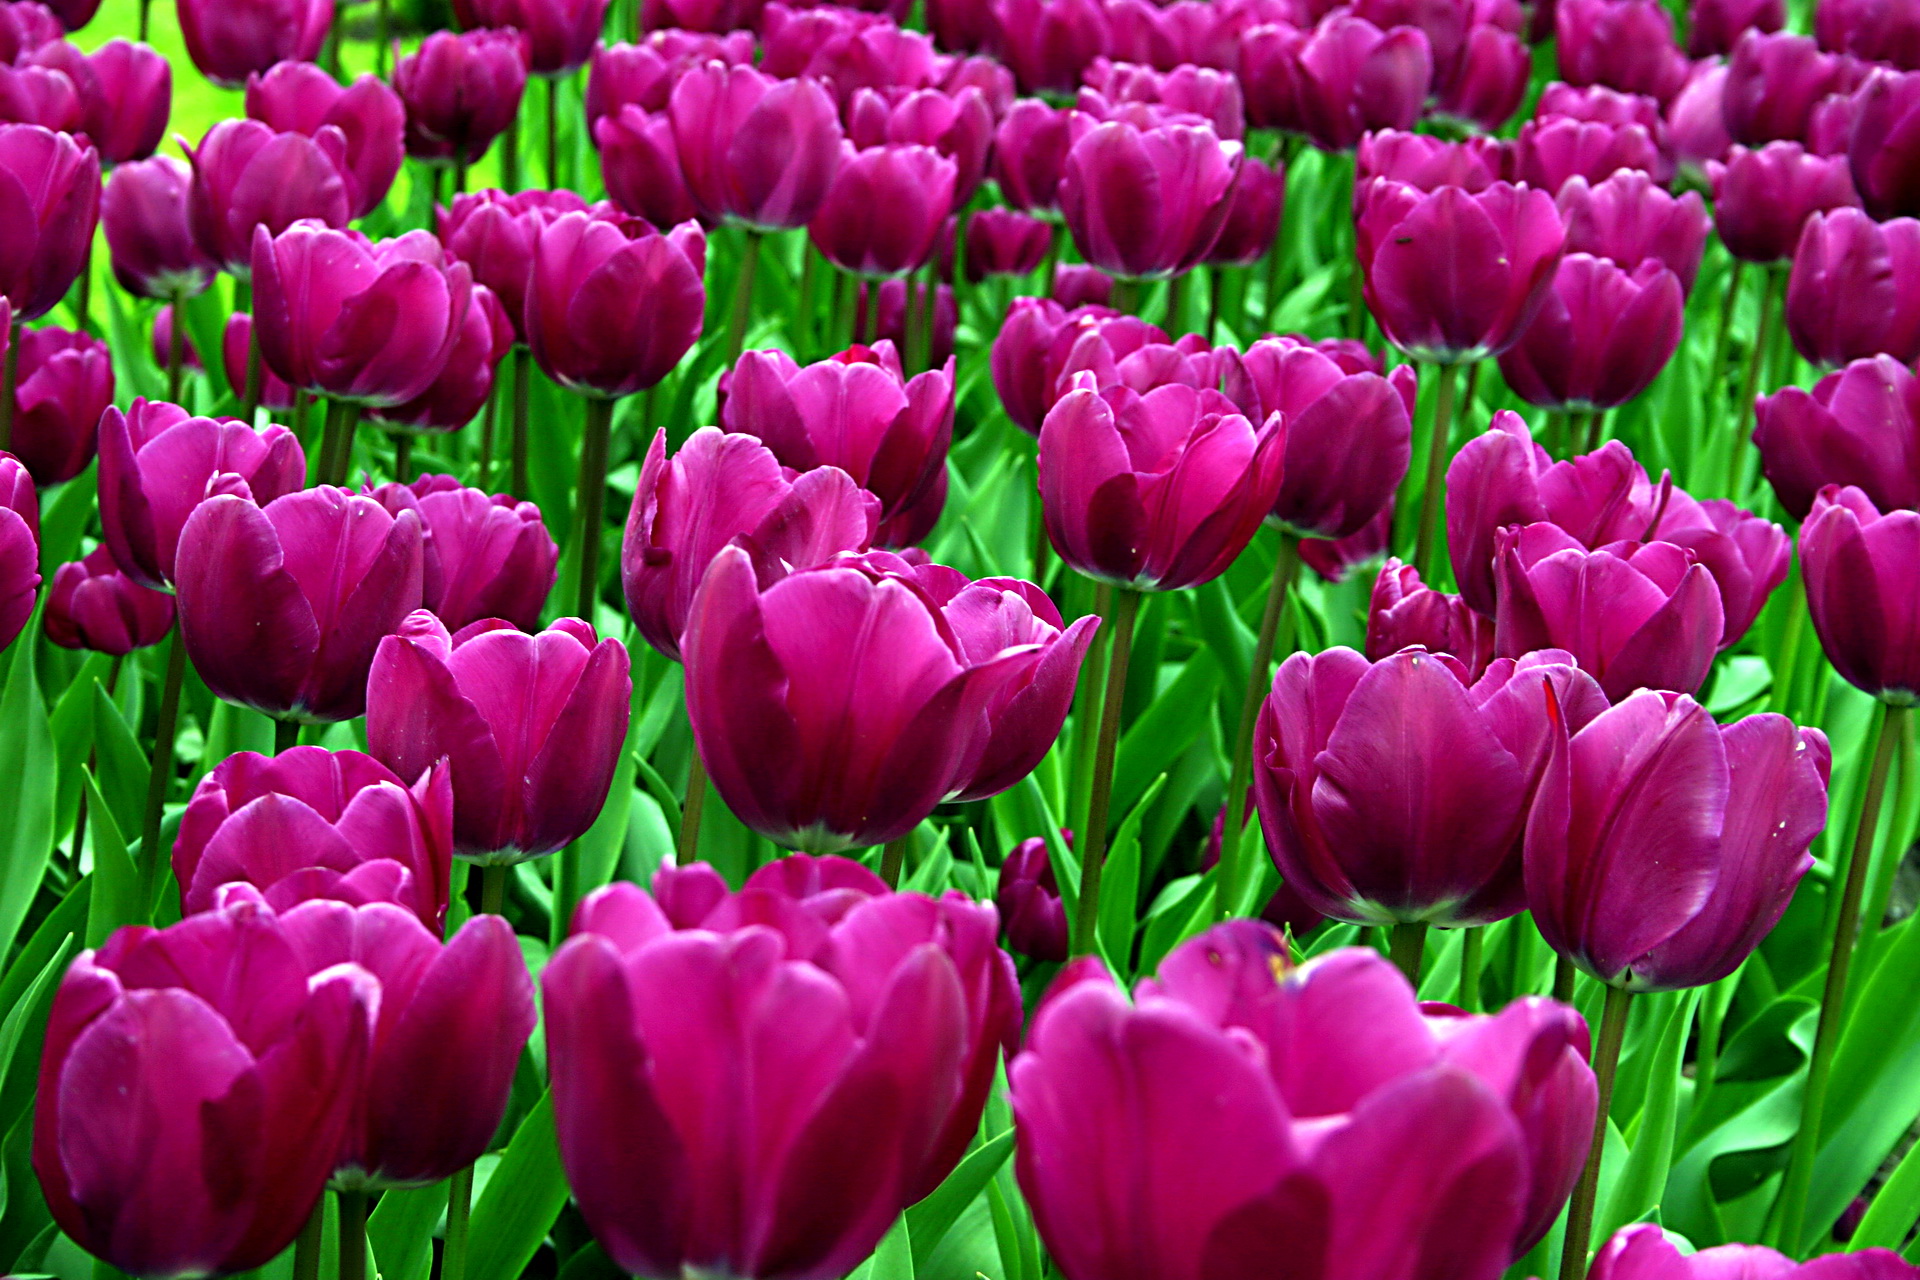 Wallpapers Of The Day: Beautiful Tulip Field | 1920x1080 Beautiful ...